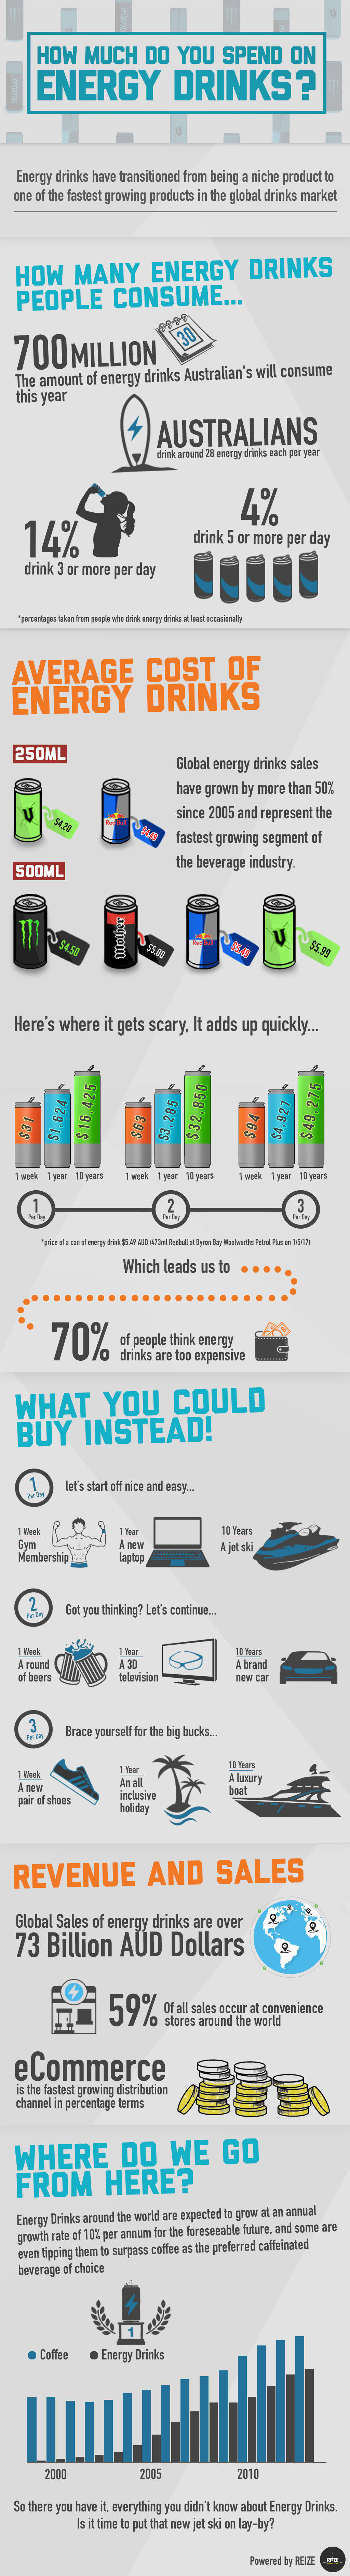 How Much Do You Spend On Energy Drinks